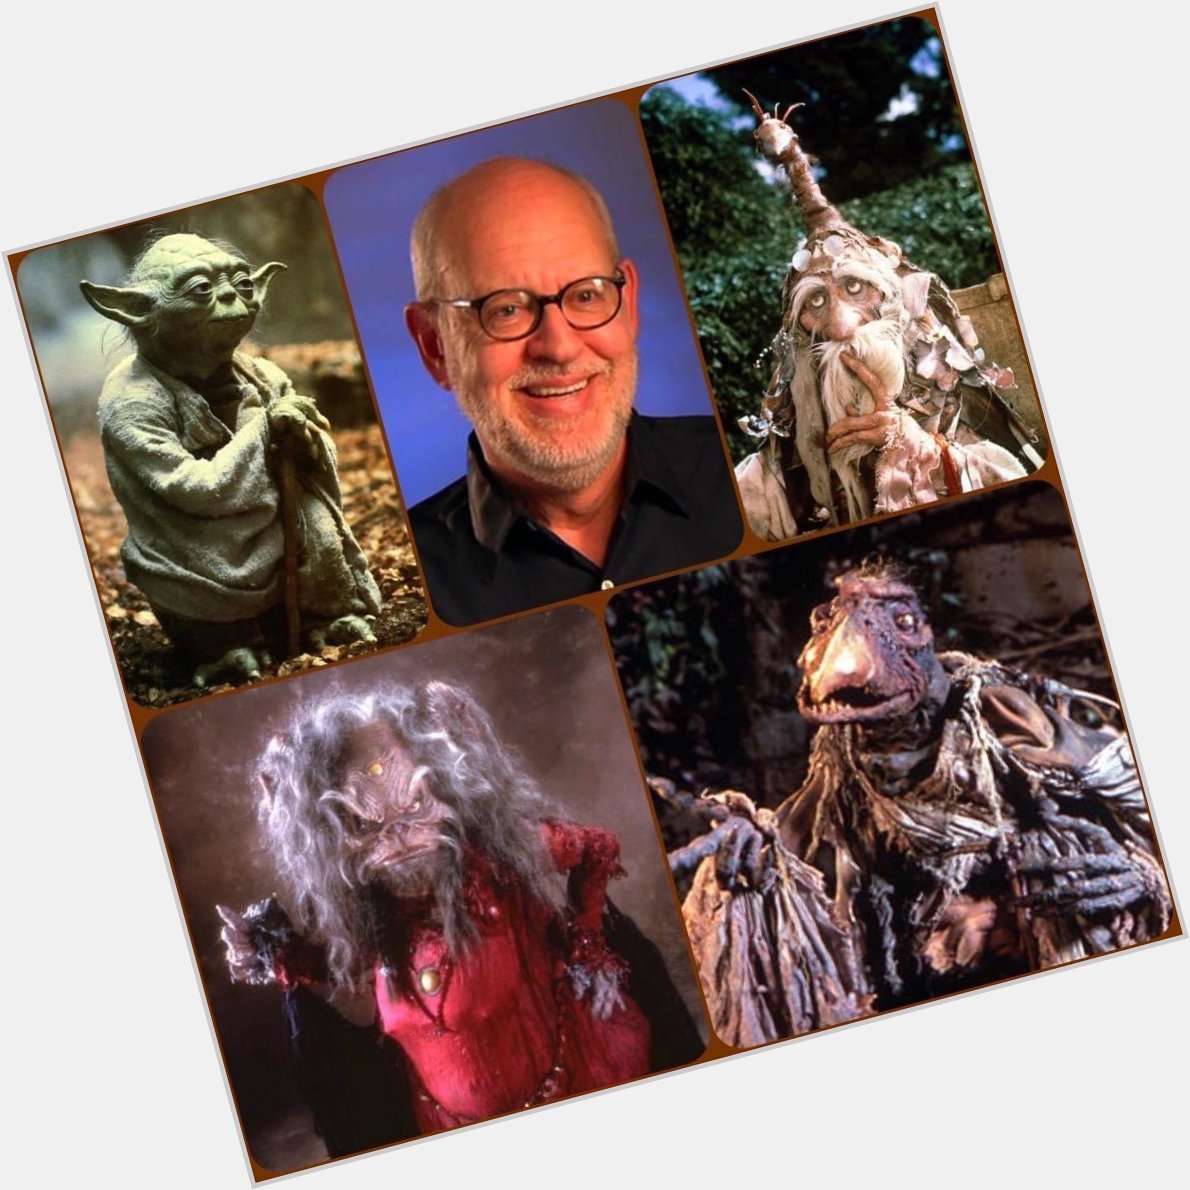 Happy birthday to Frank Oz. He is a muppeteer for Jedi Master Yoda, Miss Piggy in the Muppet show. 